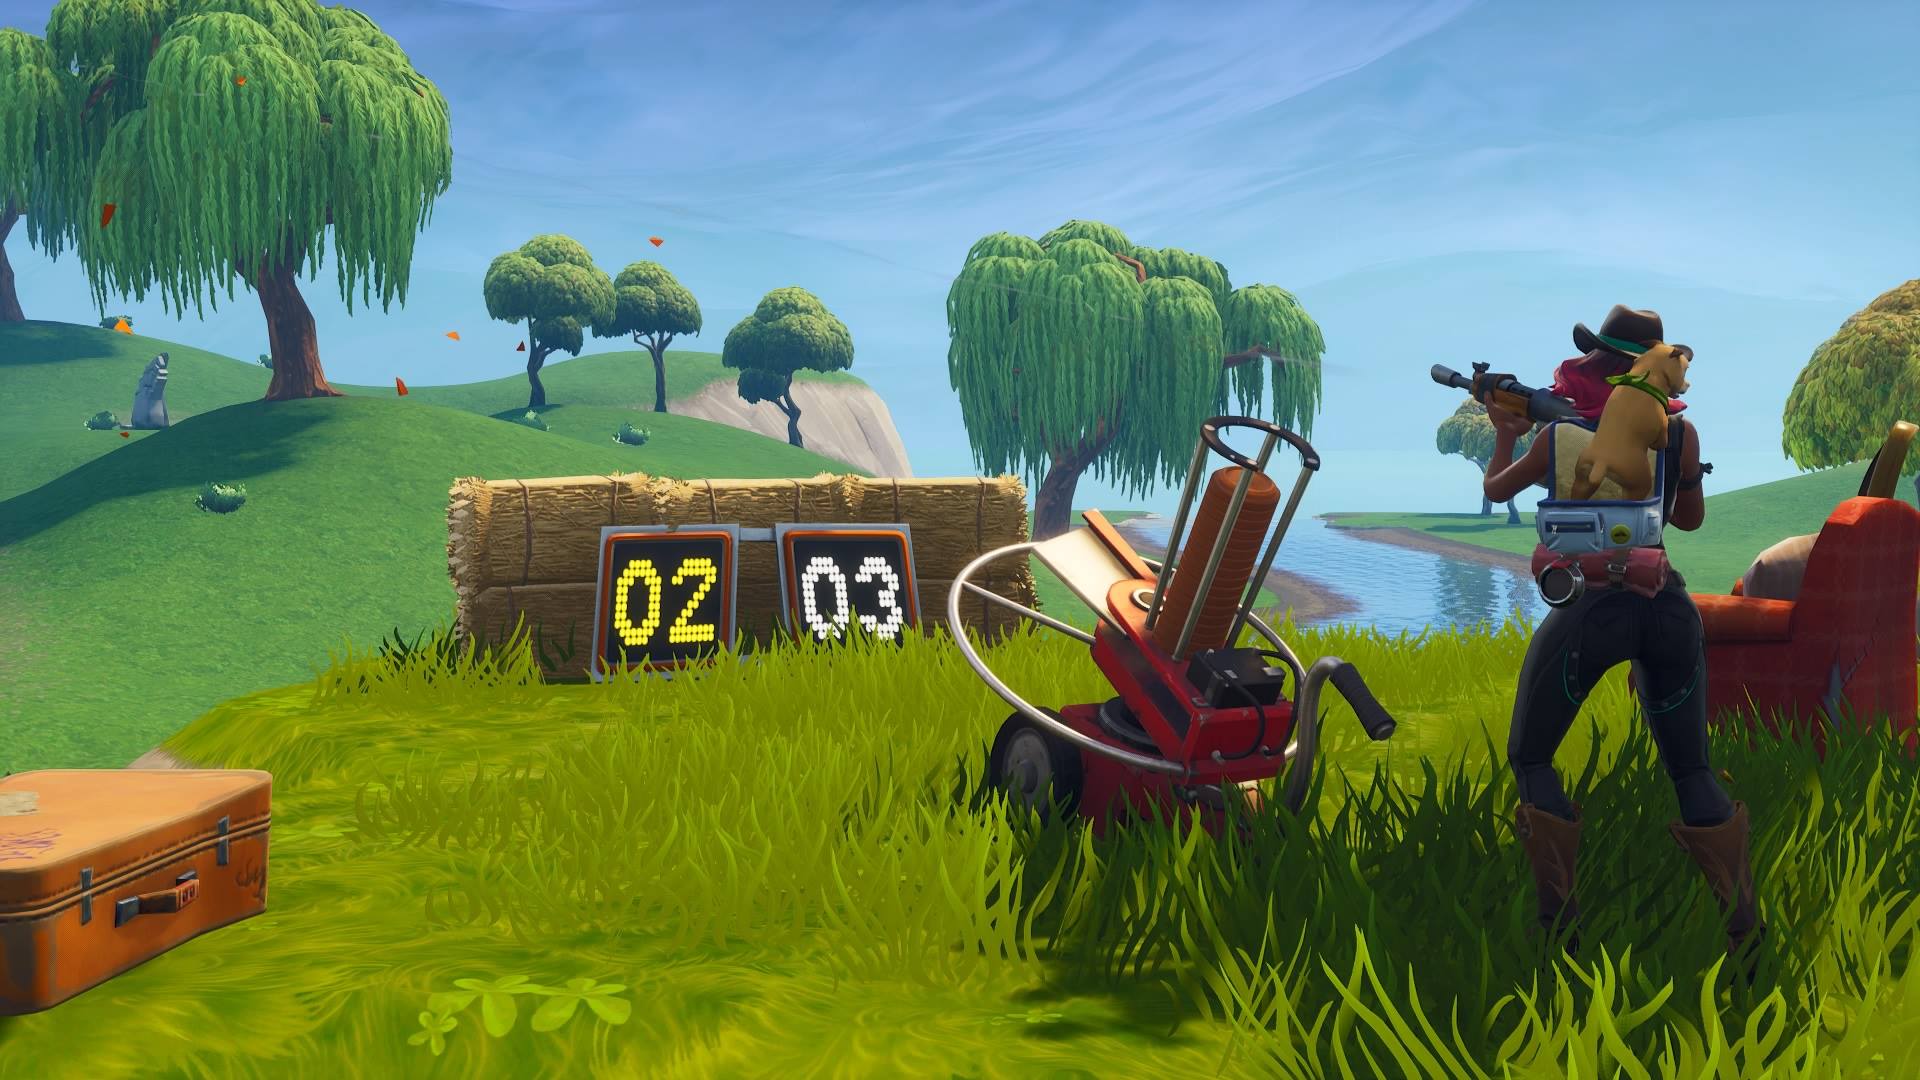 Fortnite Clay Pigeon Shooter Locations Map And Video Guide For - fortnite clay pigeon shooter locations map and video guide for week 8 inverse